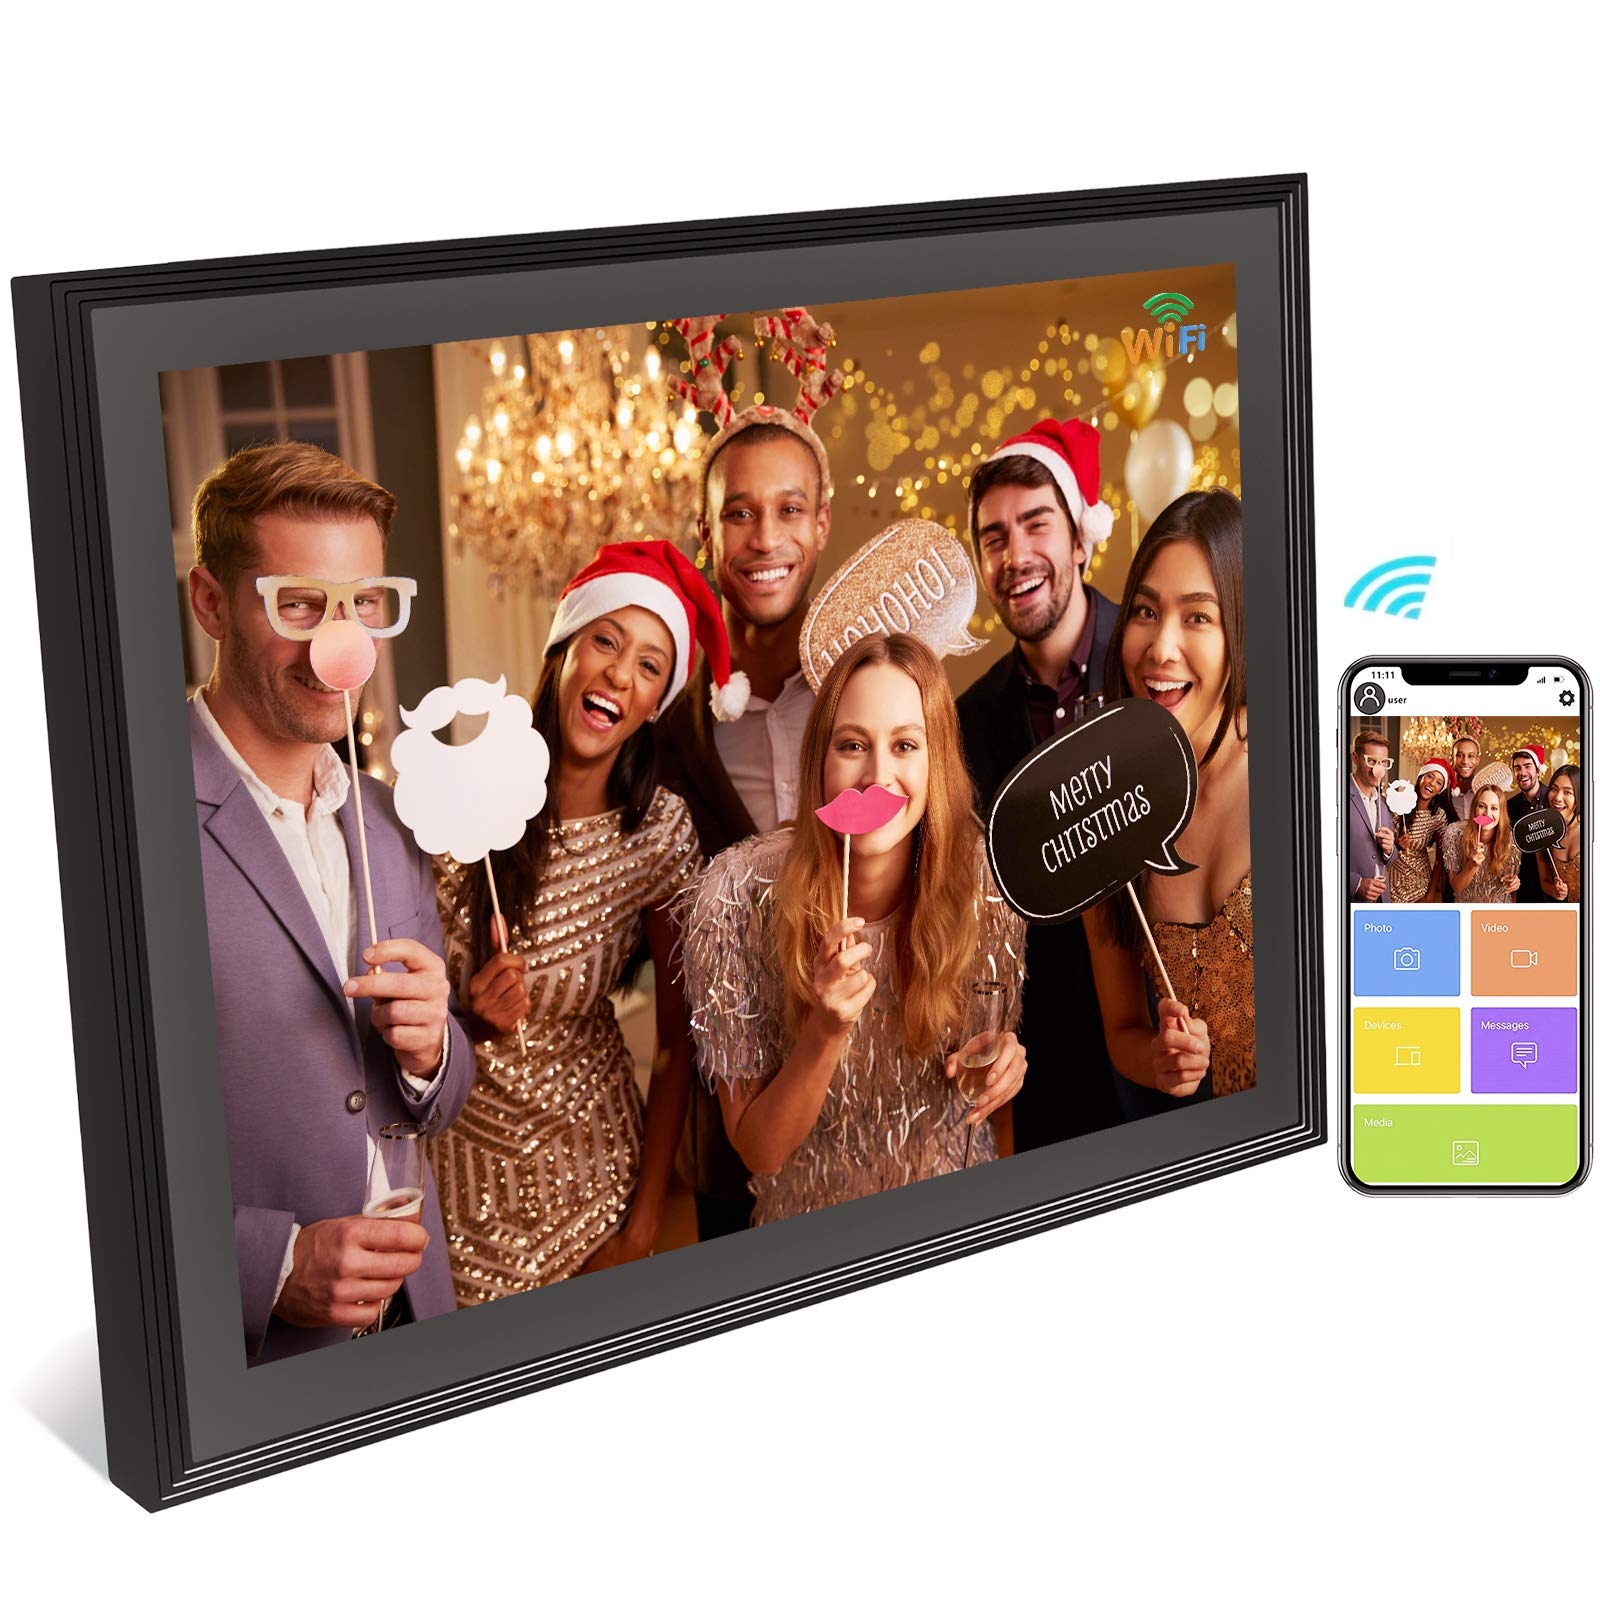 WiFi Digital Picture Frame Touch Screen 10 inch -Digital Photo Frame 16GB Storage Auto-Rotate HD Smart Electronic Picture Frame family Share Photos...